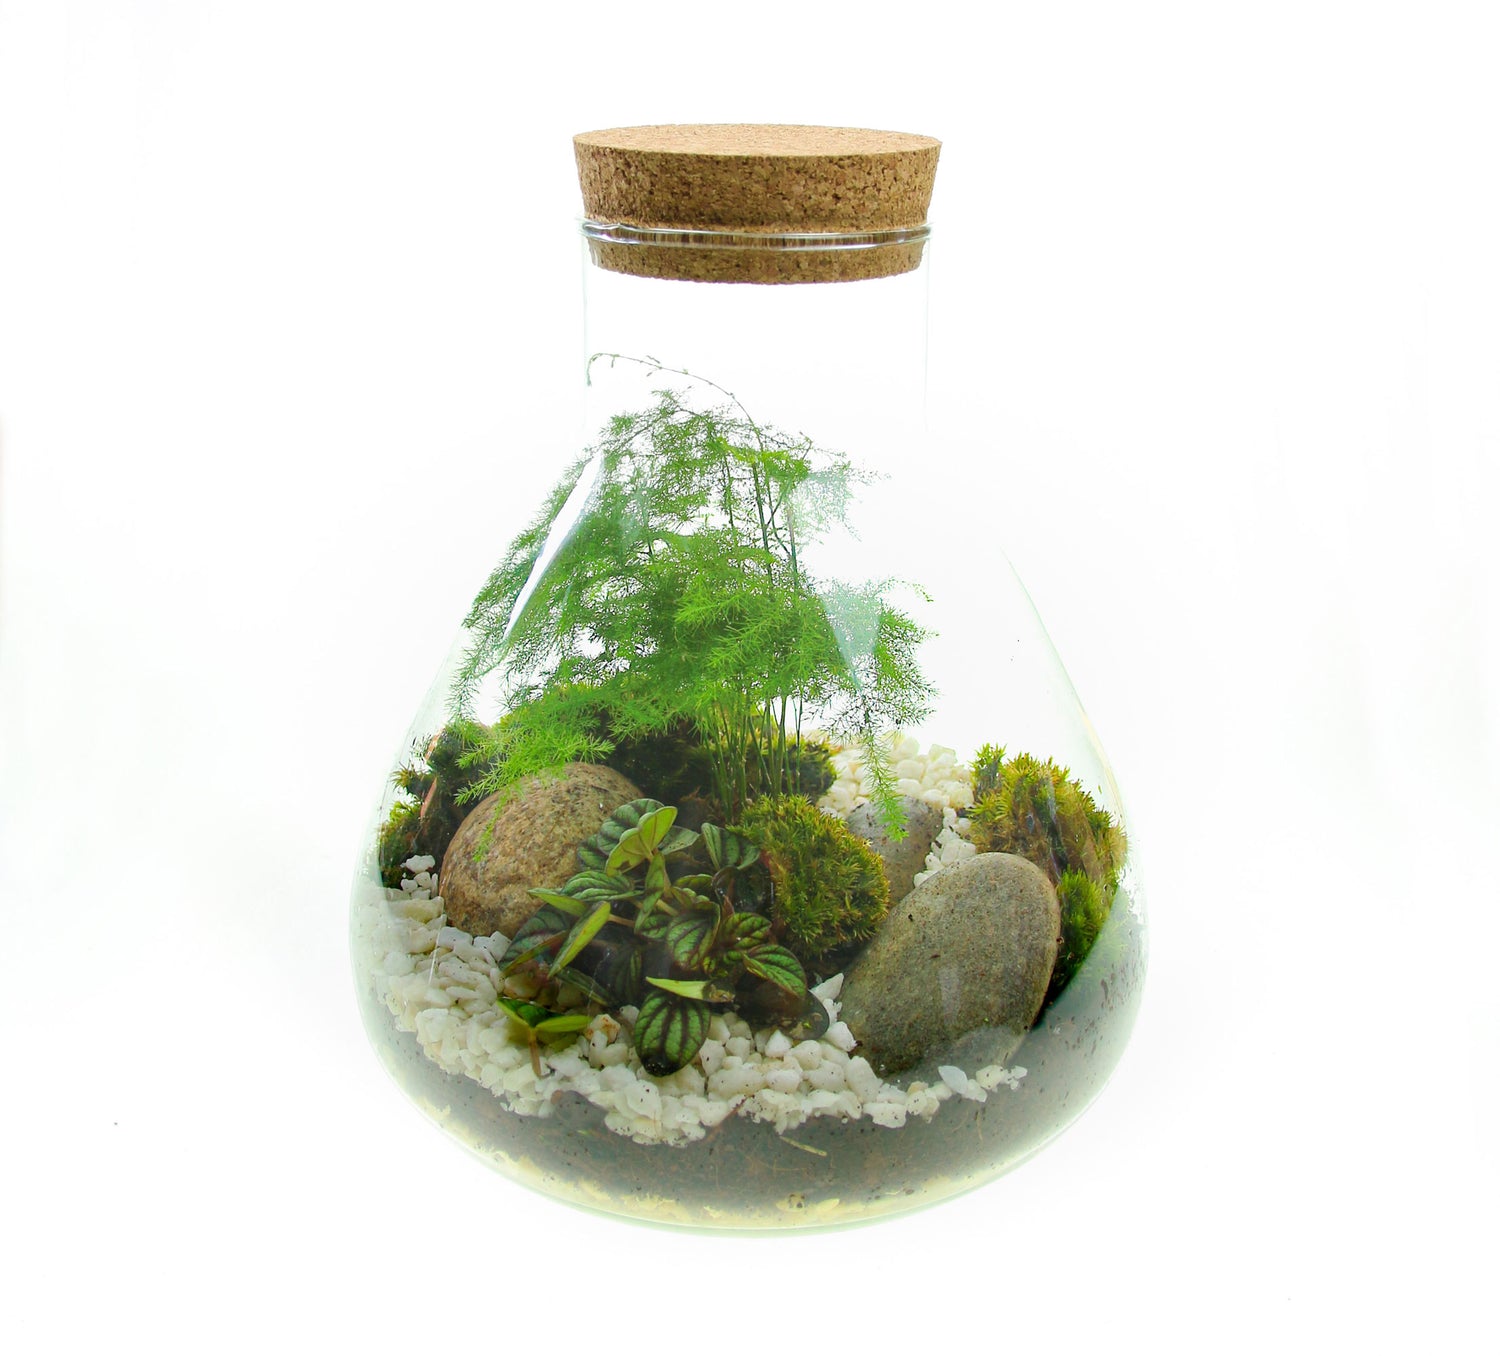 Terrarium gifts ideas delivered in the UK